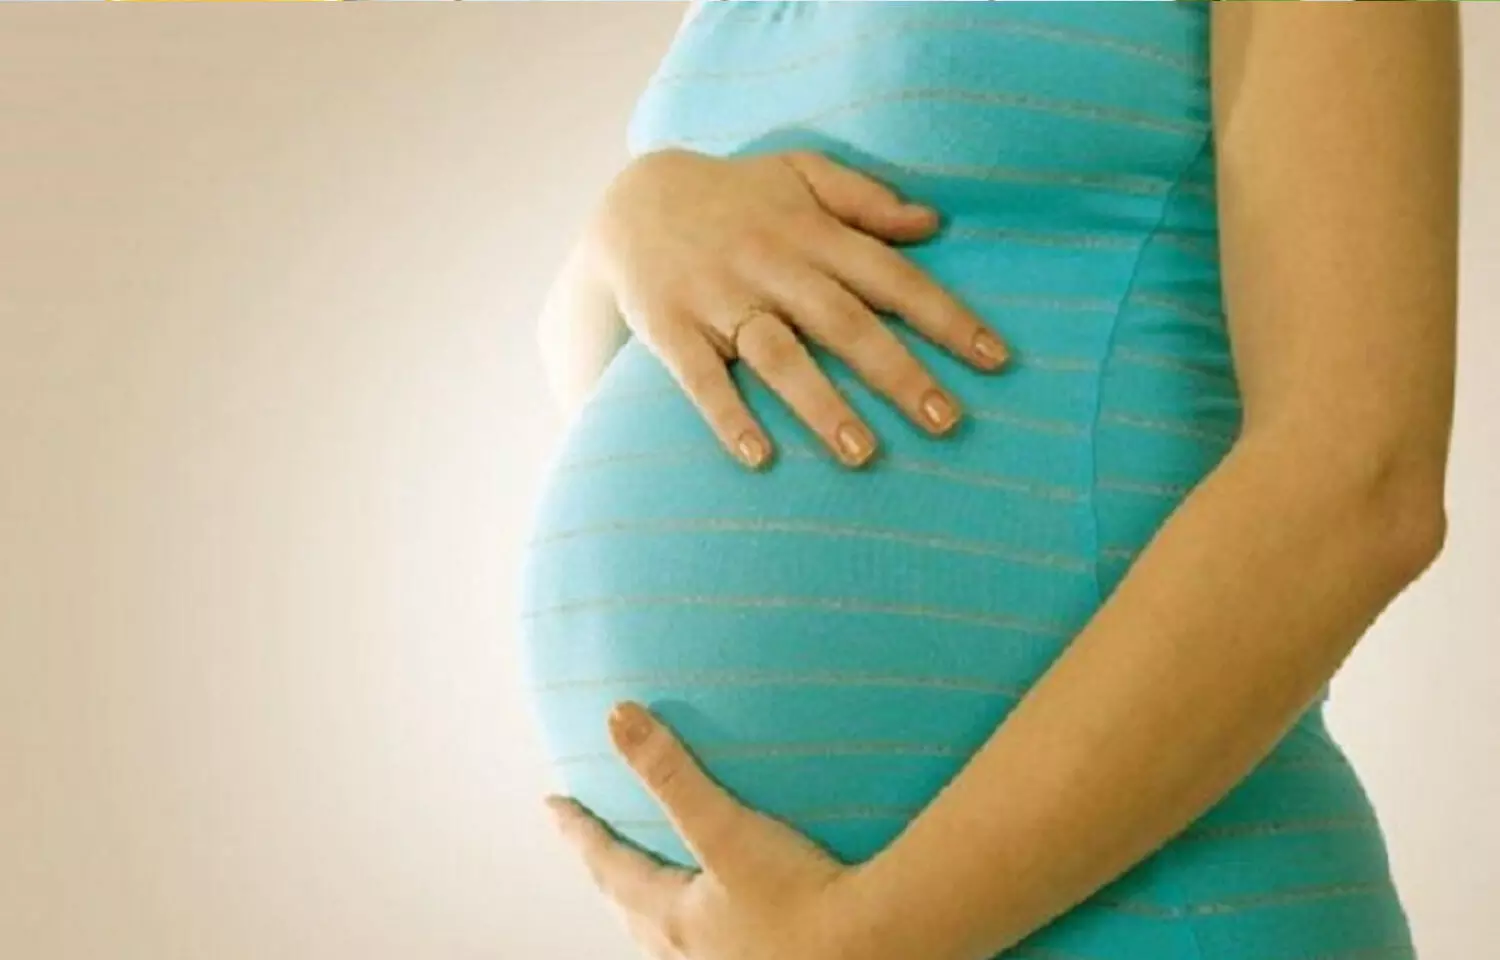 Strenuous work during pregnancy tied to high birth weight among kids